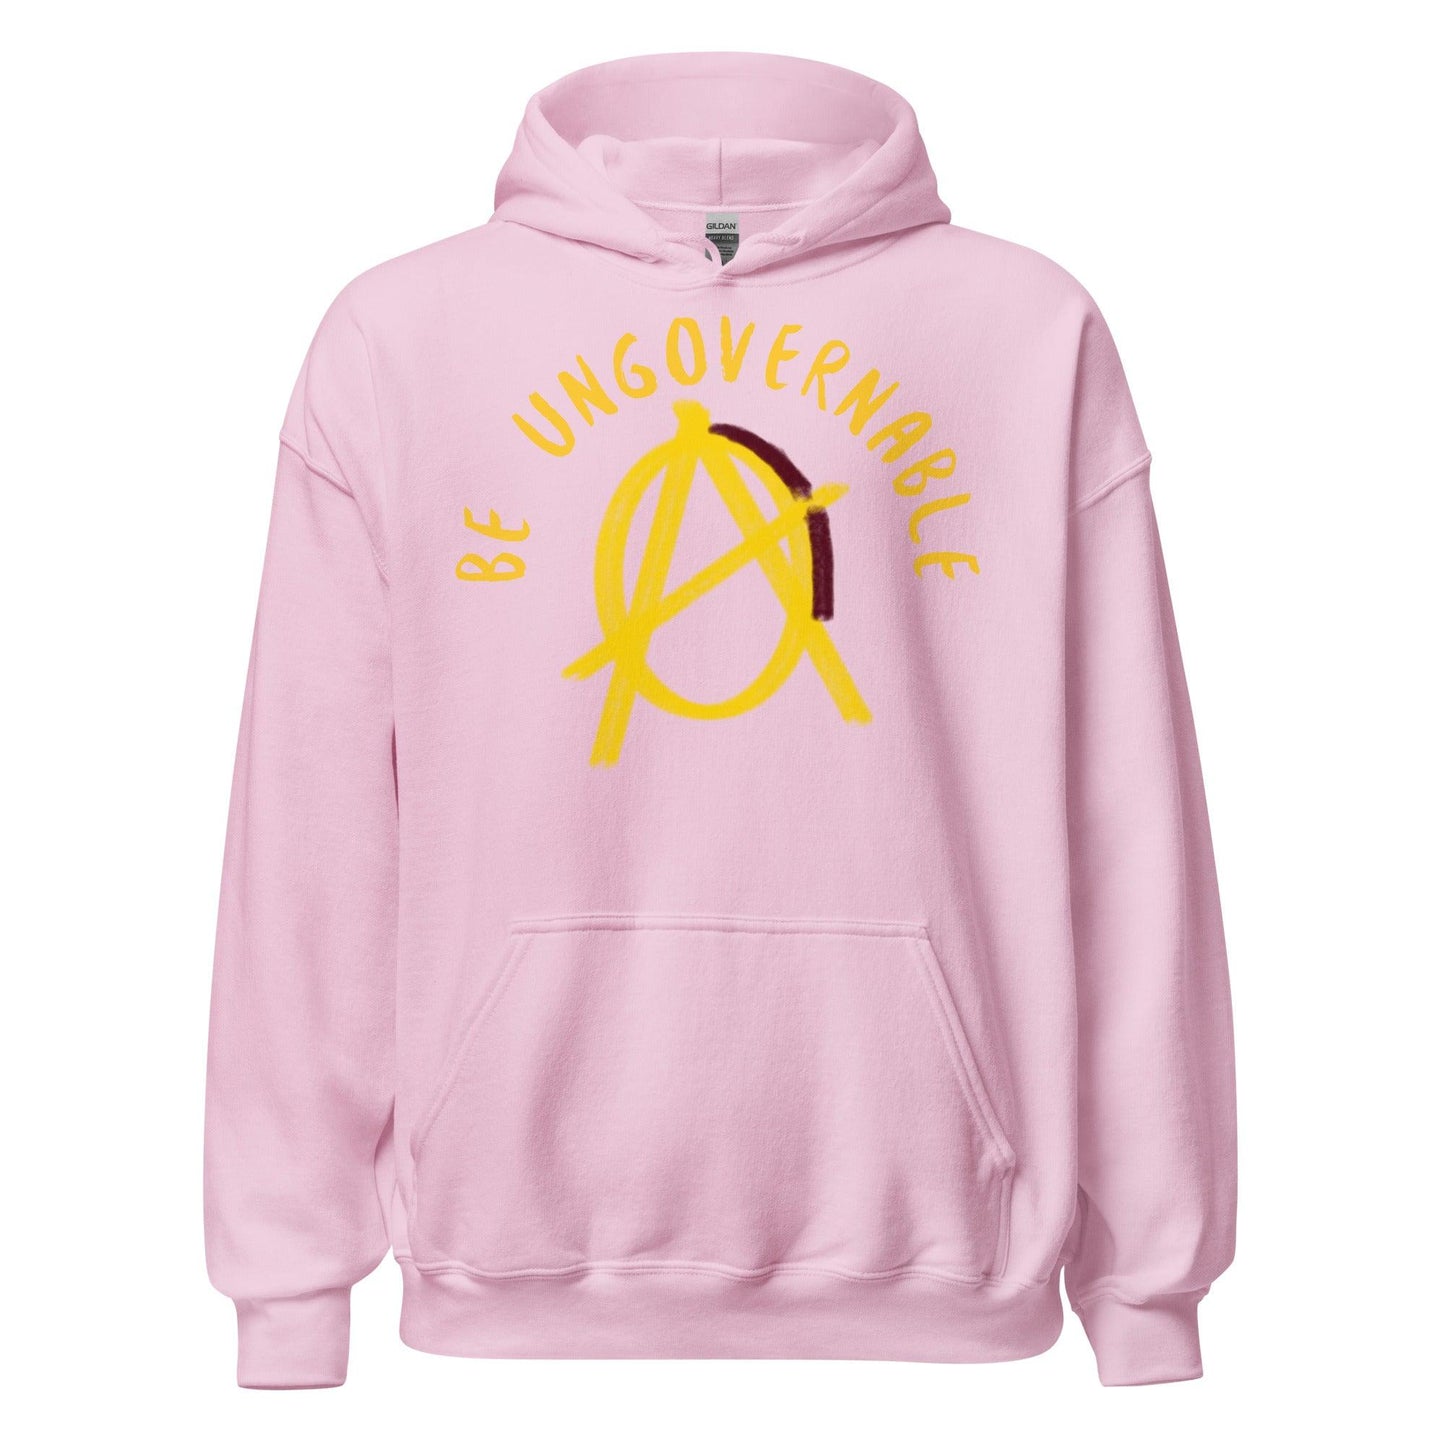 Anarchy Wear Gold "Be Ungovernable" Hoodie - AnarchyWear